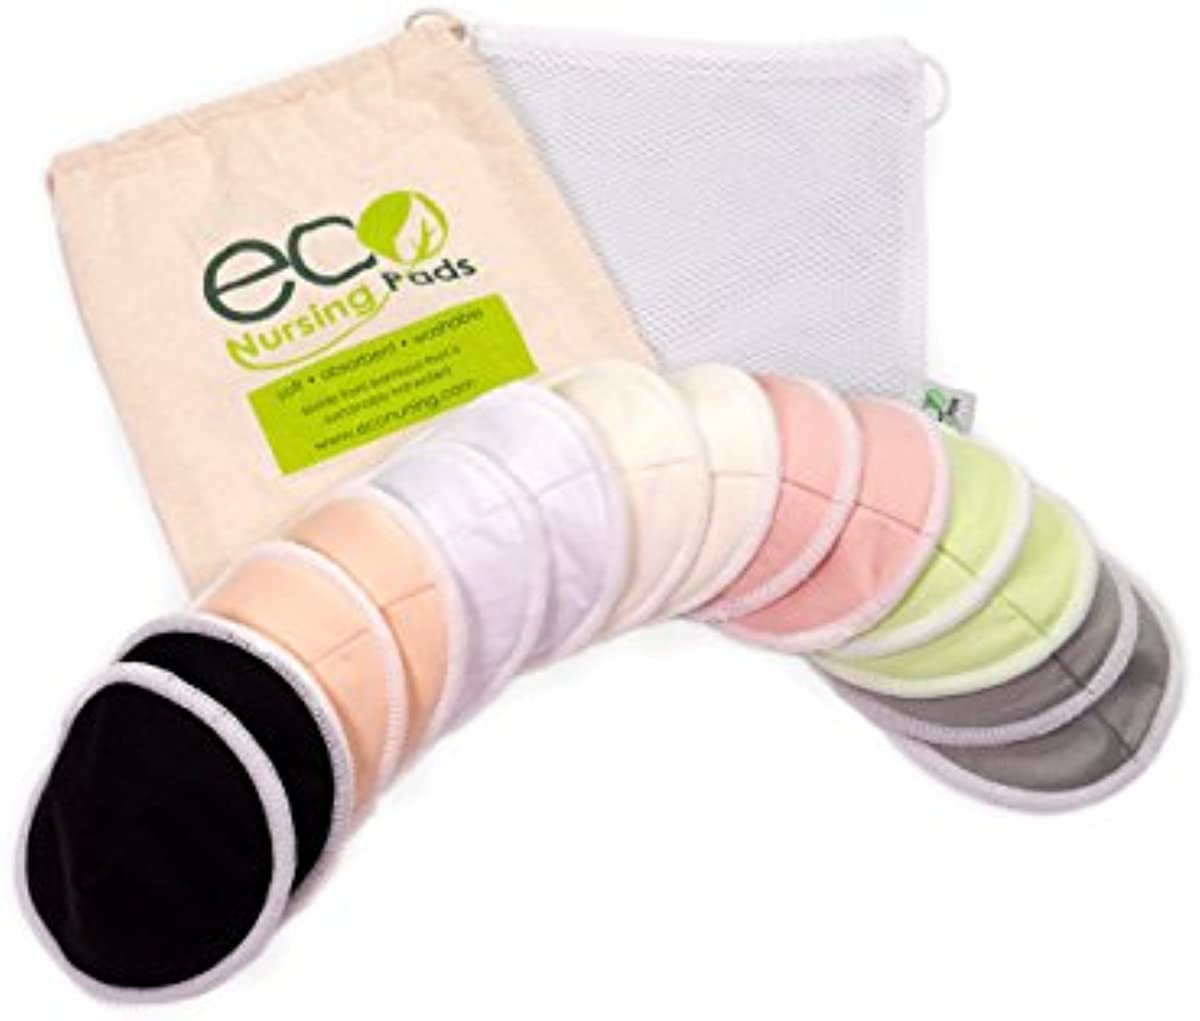 Contoured or Round | Washable Reusable Bamboo Nursing Pads | Organic Bamboo Breastfeeding Pads | Large (12cm) | 14 Pack with 2 Bonus Pouches & Free E-Book